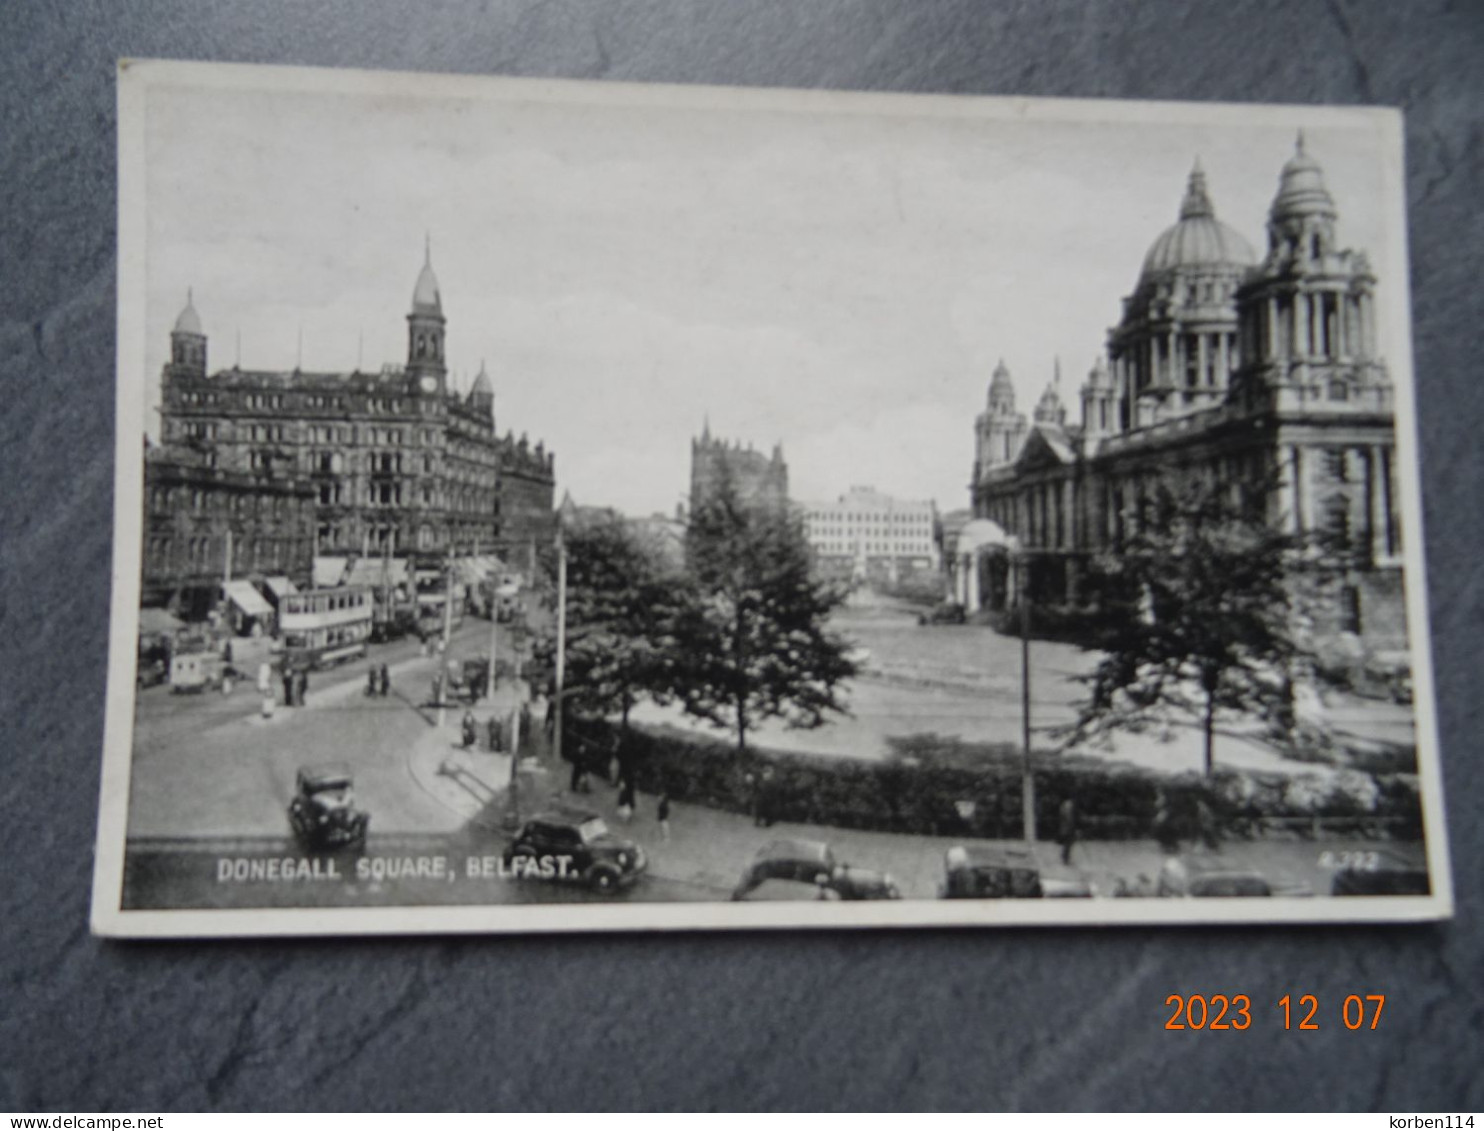 DONEGALL SQUARE - Belfast